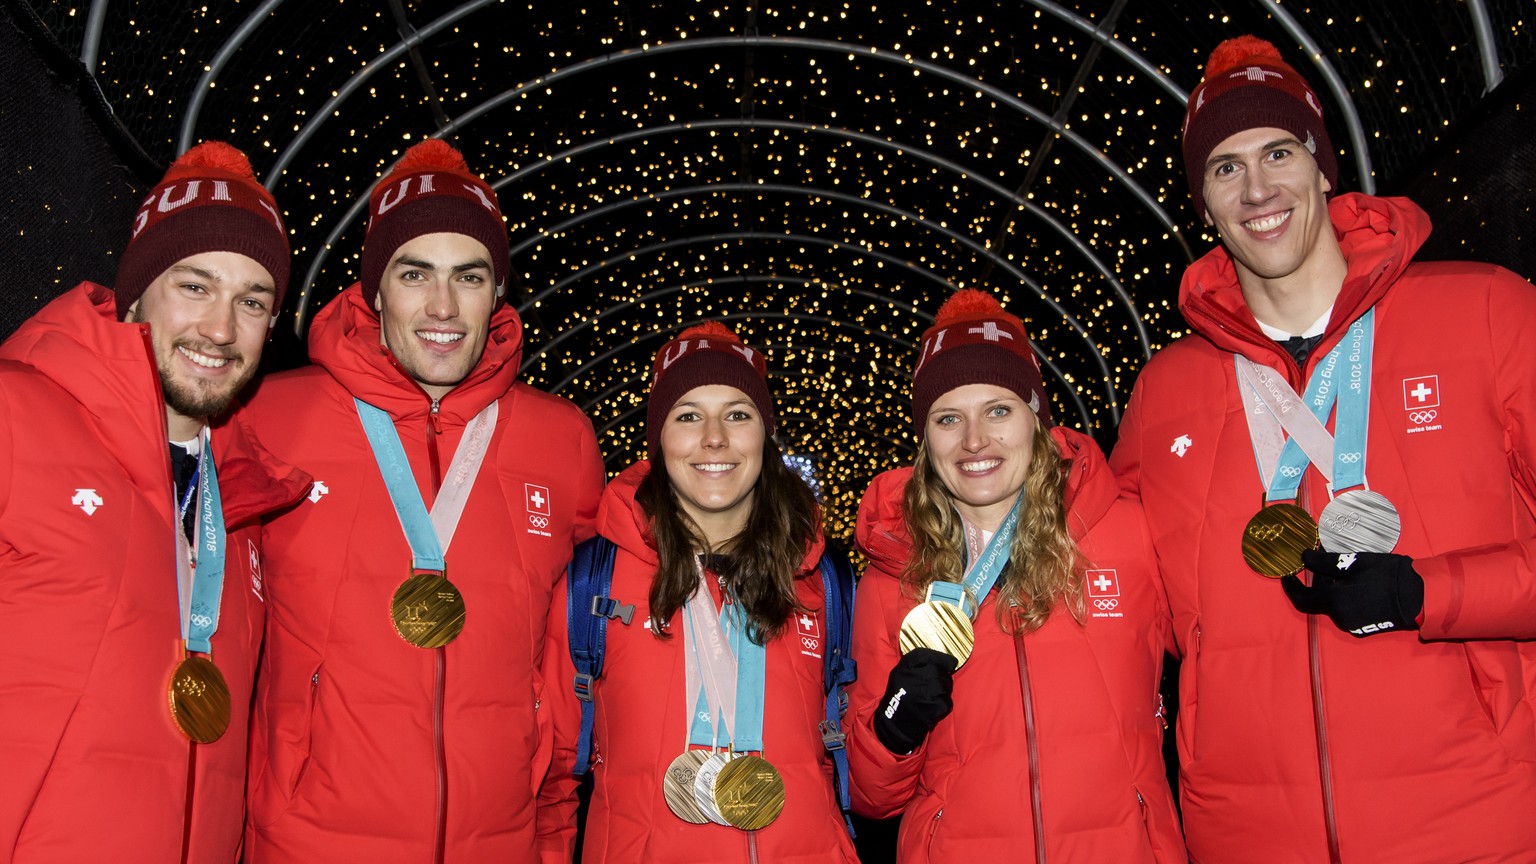 Frome left to right, Luca Aerni, Daniel Yule, Wendy Holdener, Denise Feierabend, Ramon Zenhaeusern, pose at the House of Switzerland after the Alpine Skiing Team event during the XXIII Winter Olympics ...